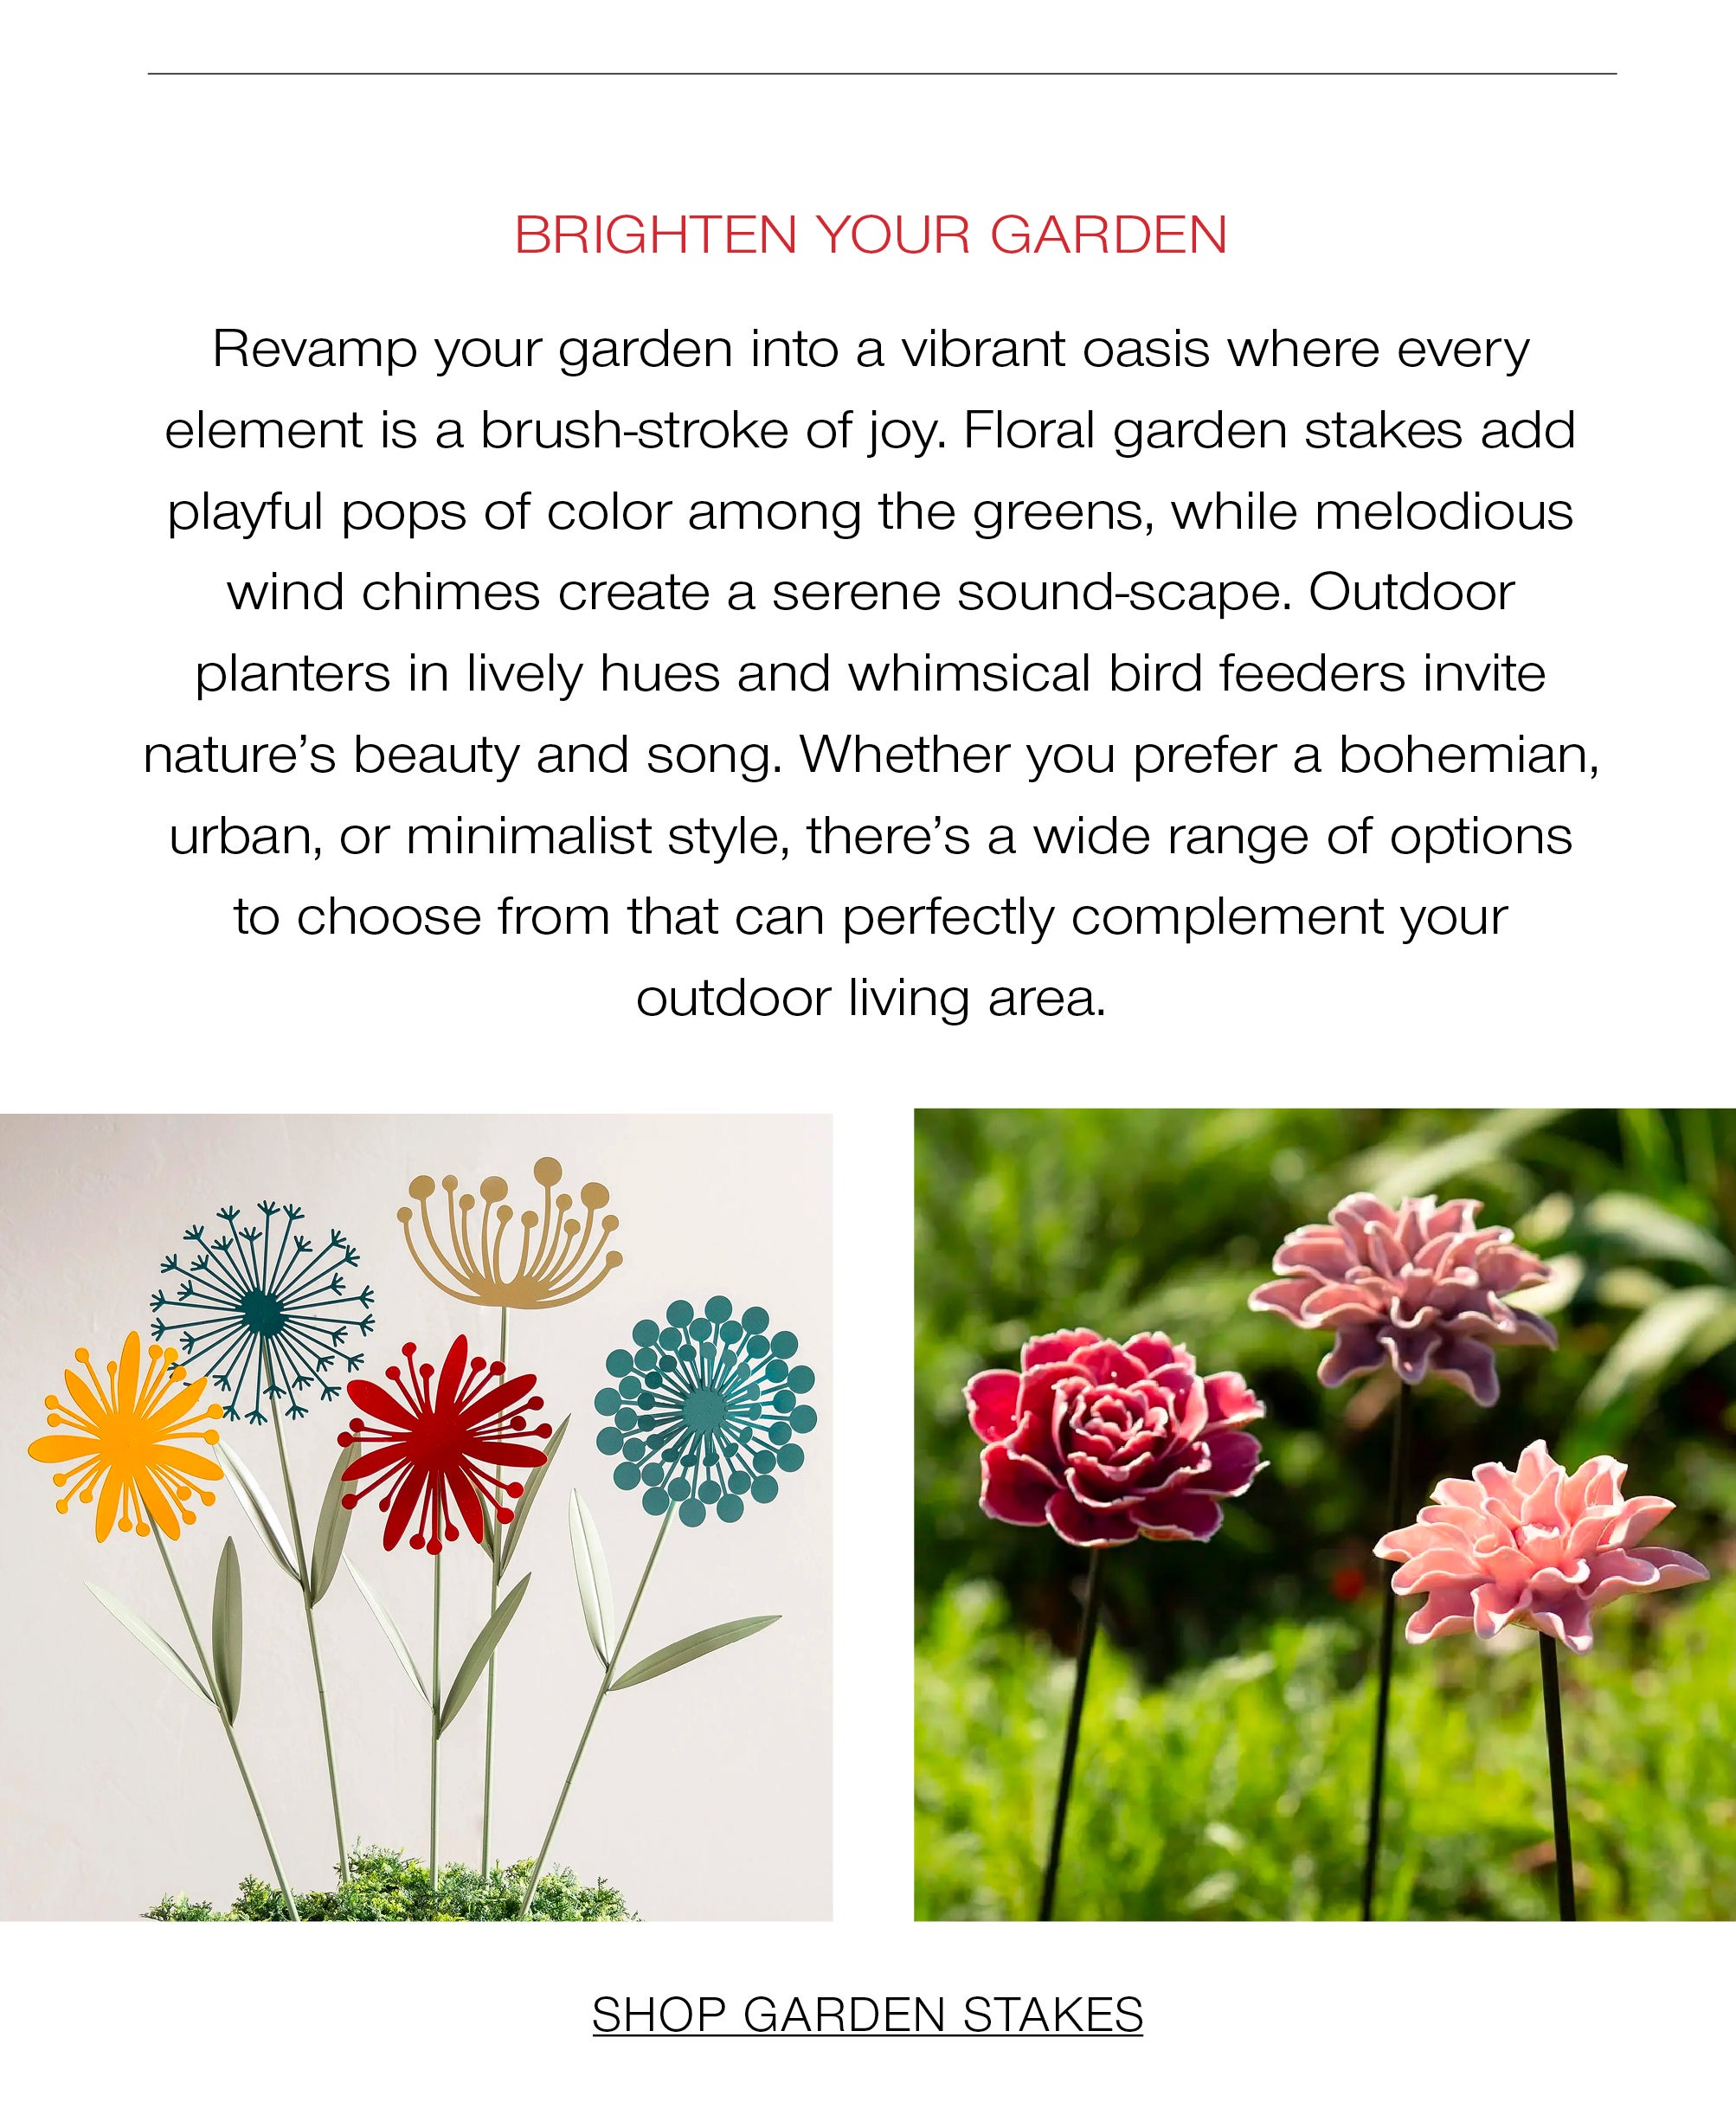 Brighten your garden<br />Revamp your garden into a vibrant oasis where every element is a brushstroke of joy. Floral garden stakes add playful pops of color among the greens, while melodious wind chimes create a serene soundscape. Outdoor planters in lively hues and whimsical bird feeders invite nature's beauty and song. Whether you prefer a bohemian, urban, or minimalist style, there's a wide range of options to choose from that can perfectly complement your outdoor living area.